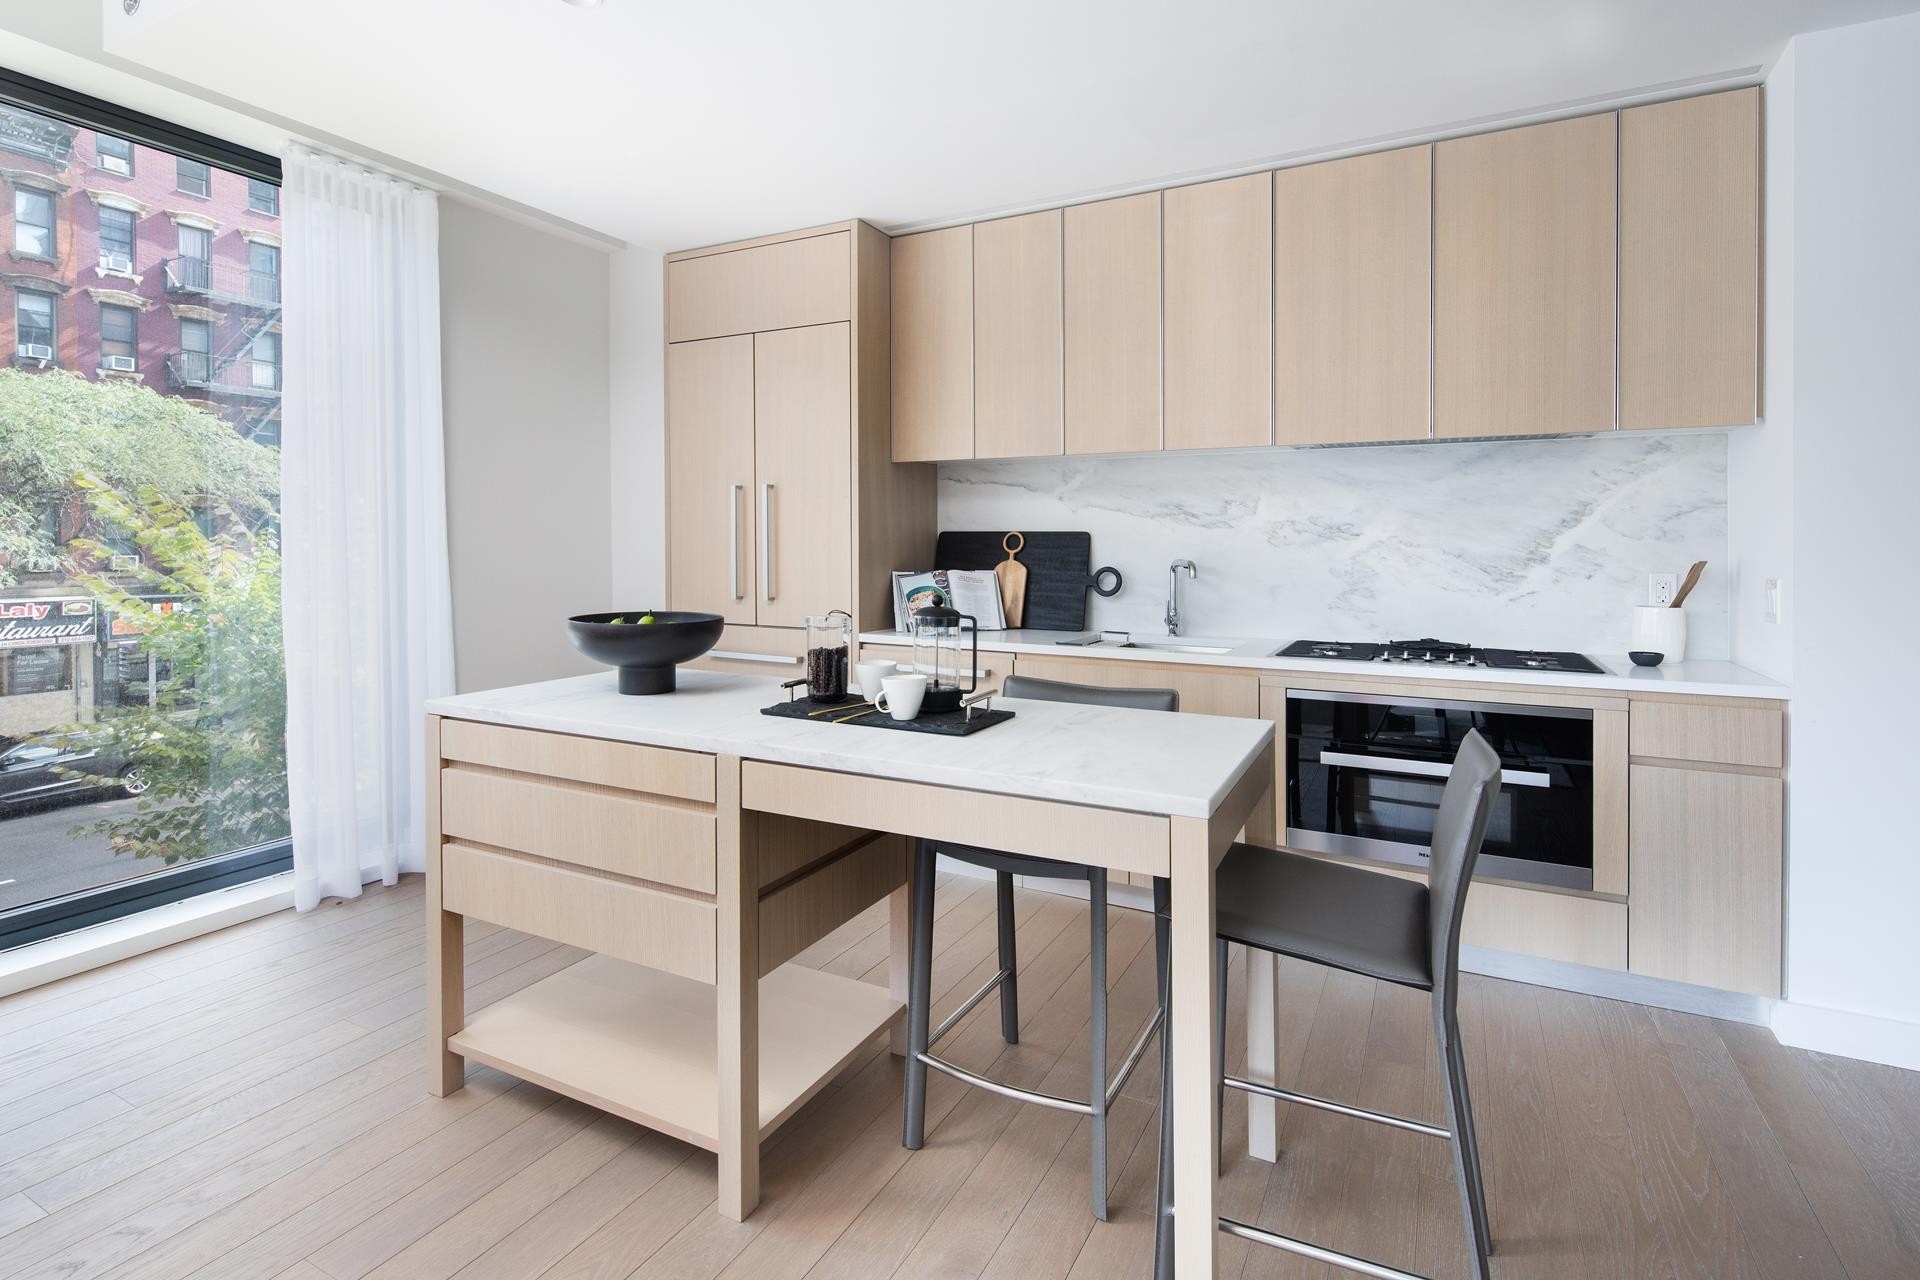 Property at Bloom 45, 500 W 45TH ST, 723 Hell's Kitchen, New York, New York 10036